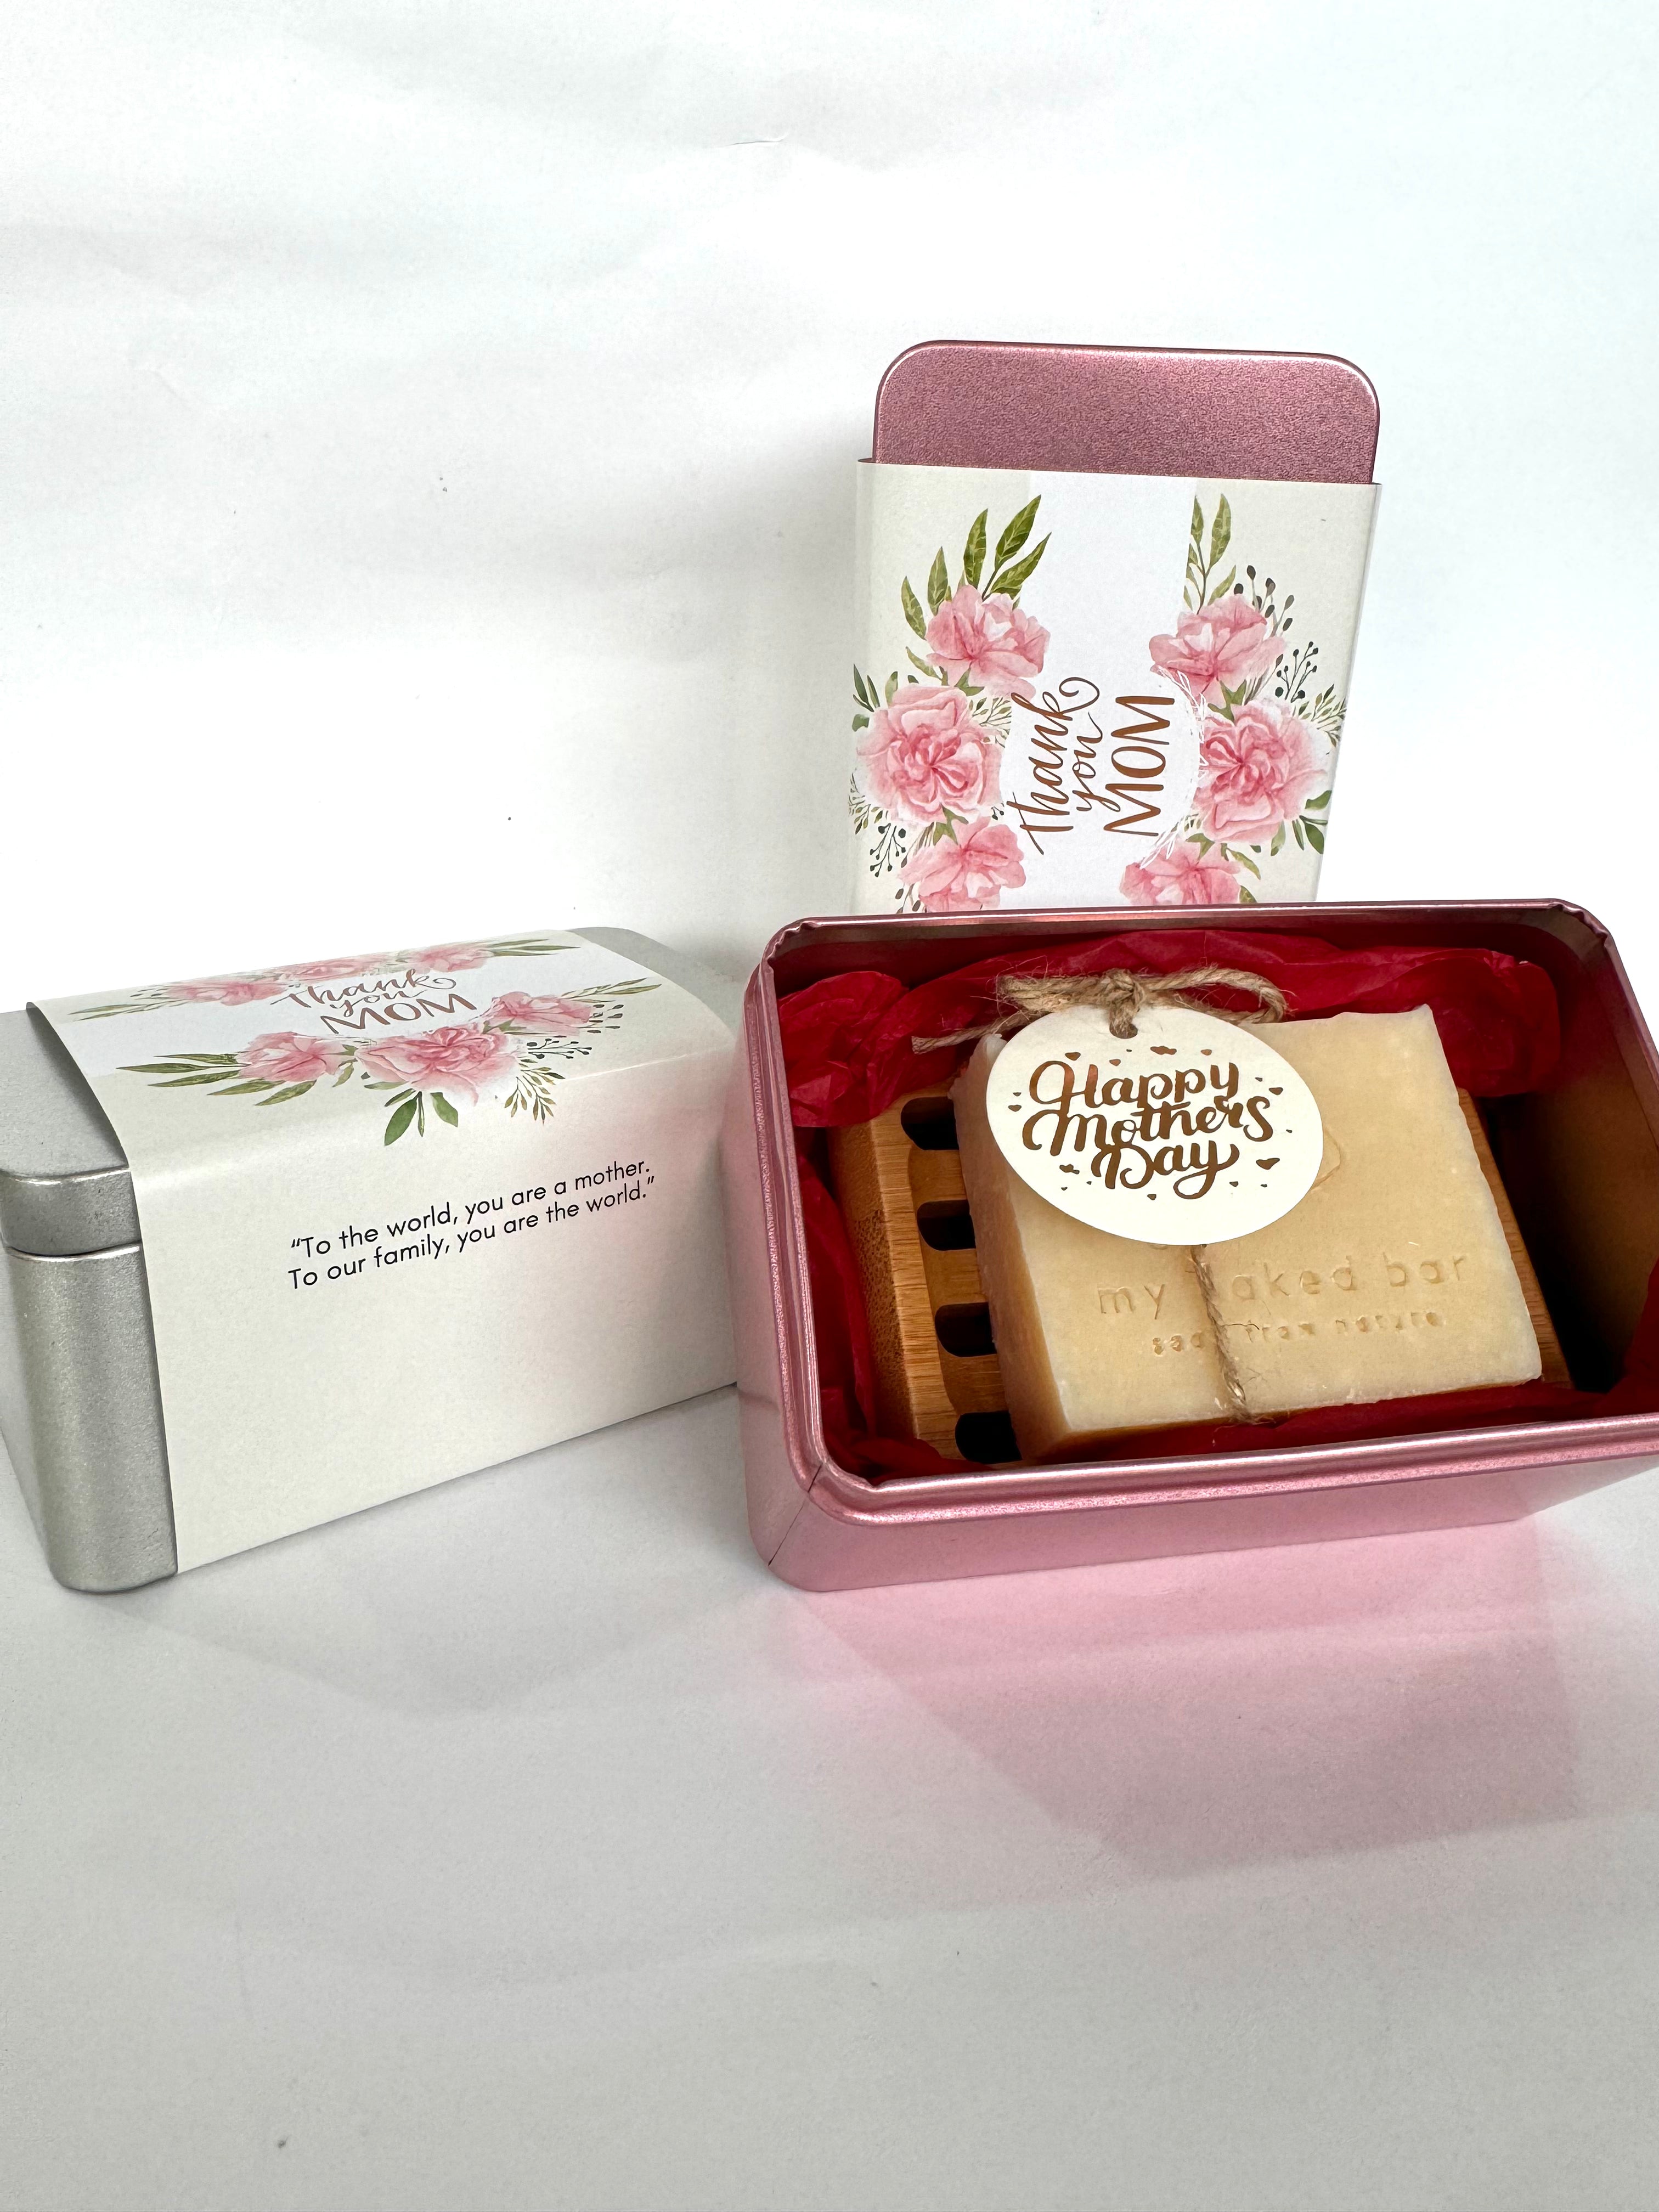 My Naked Bar Mother's Day Rice Milk Bar Gift Set | Gifting | The Green Collective SG